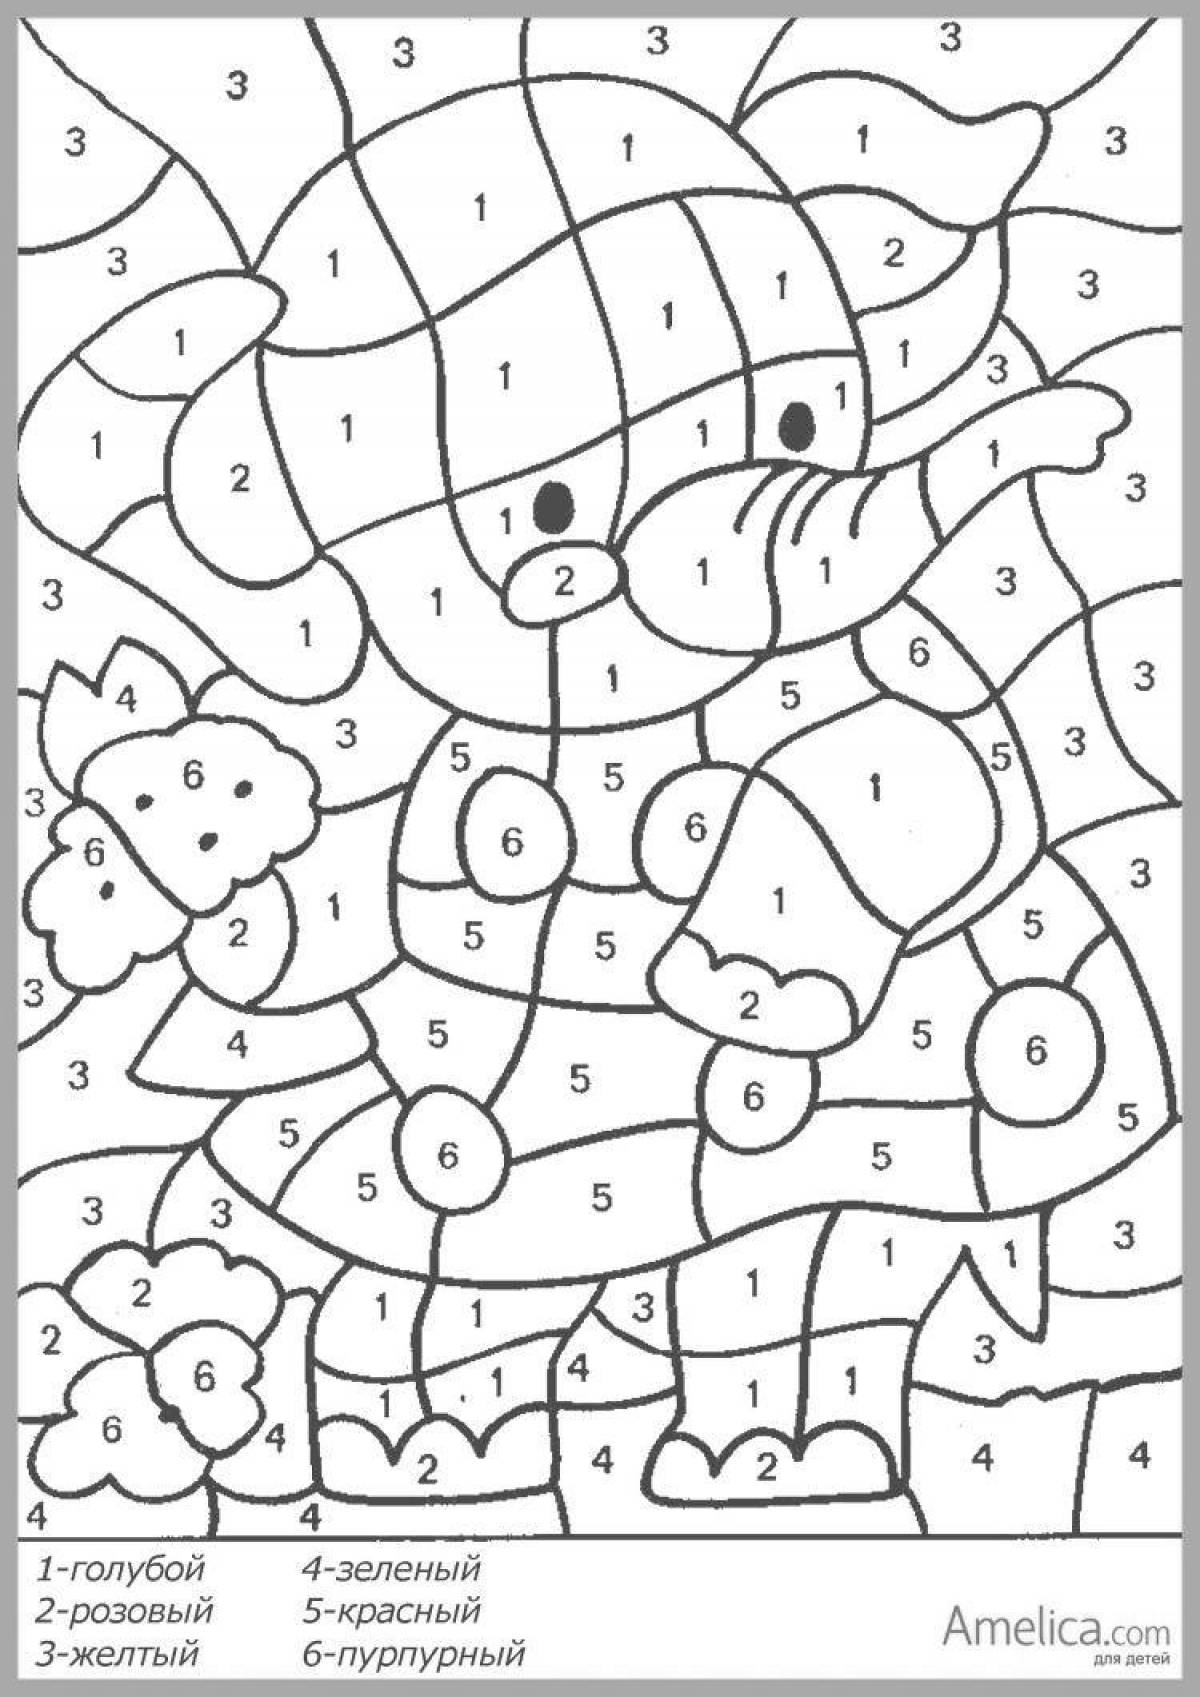 Creative strawberry number coloring game